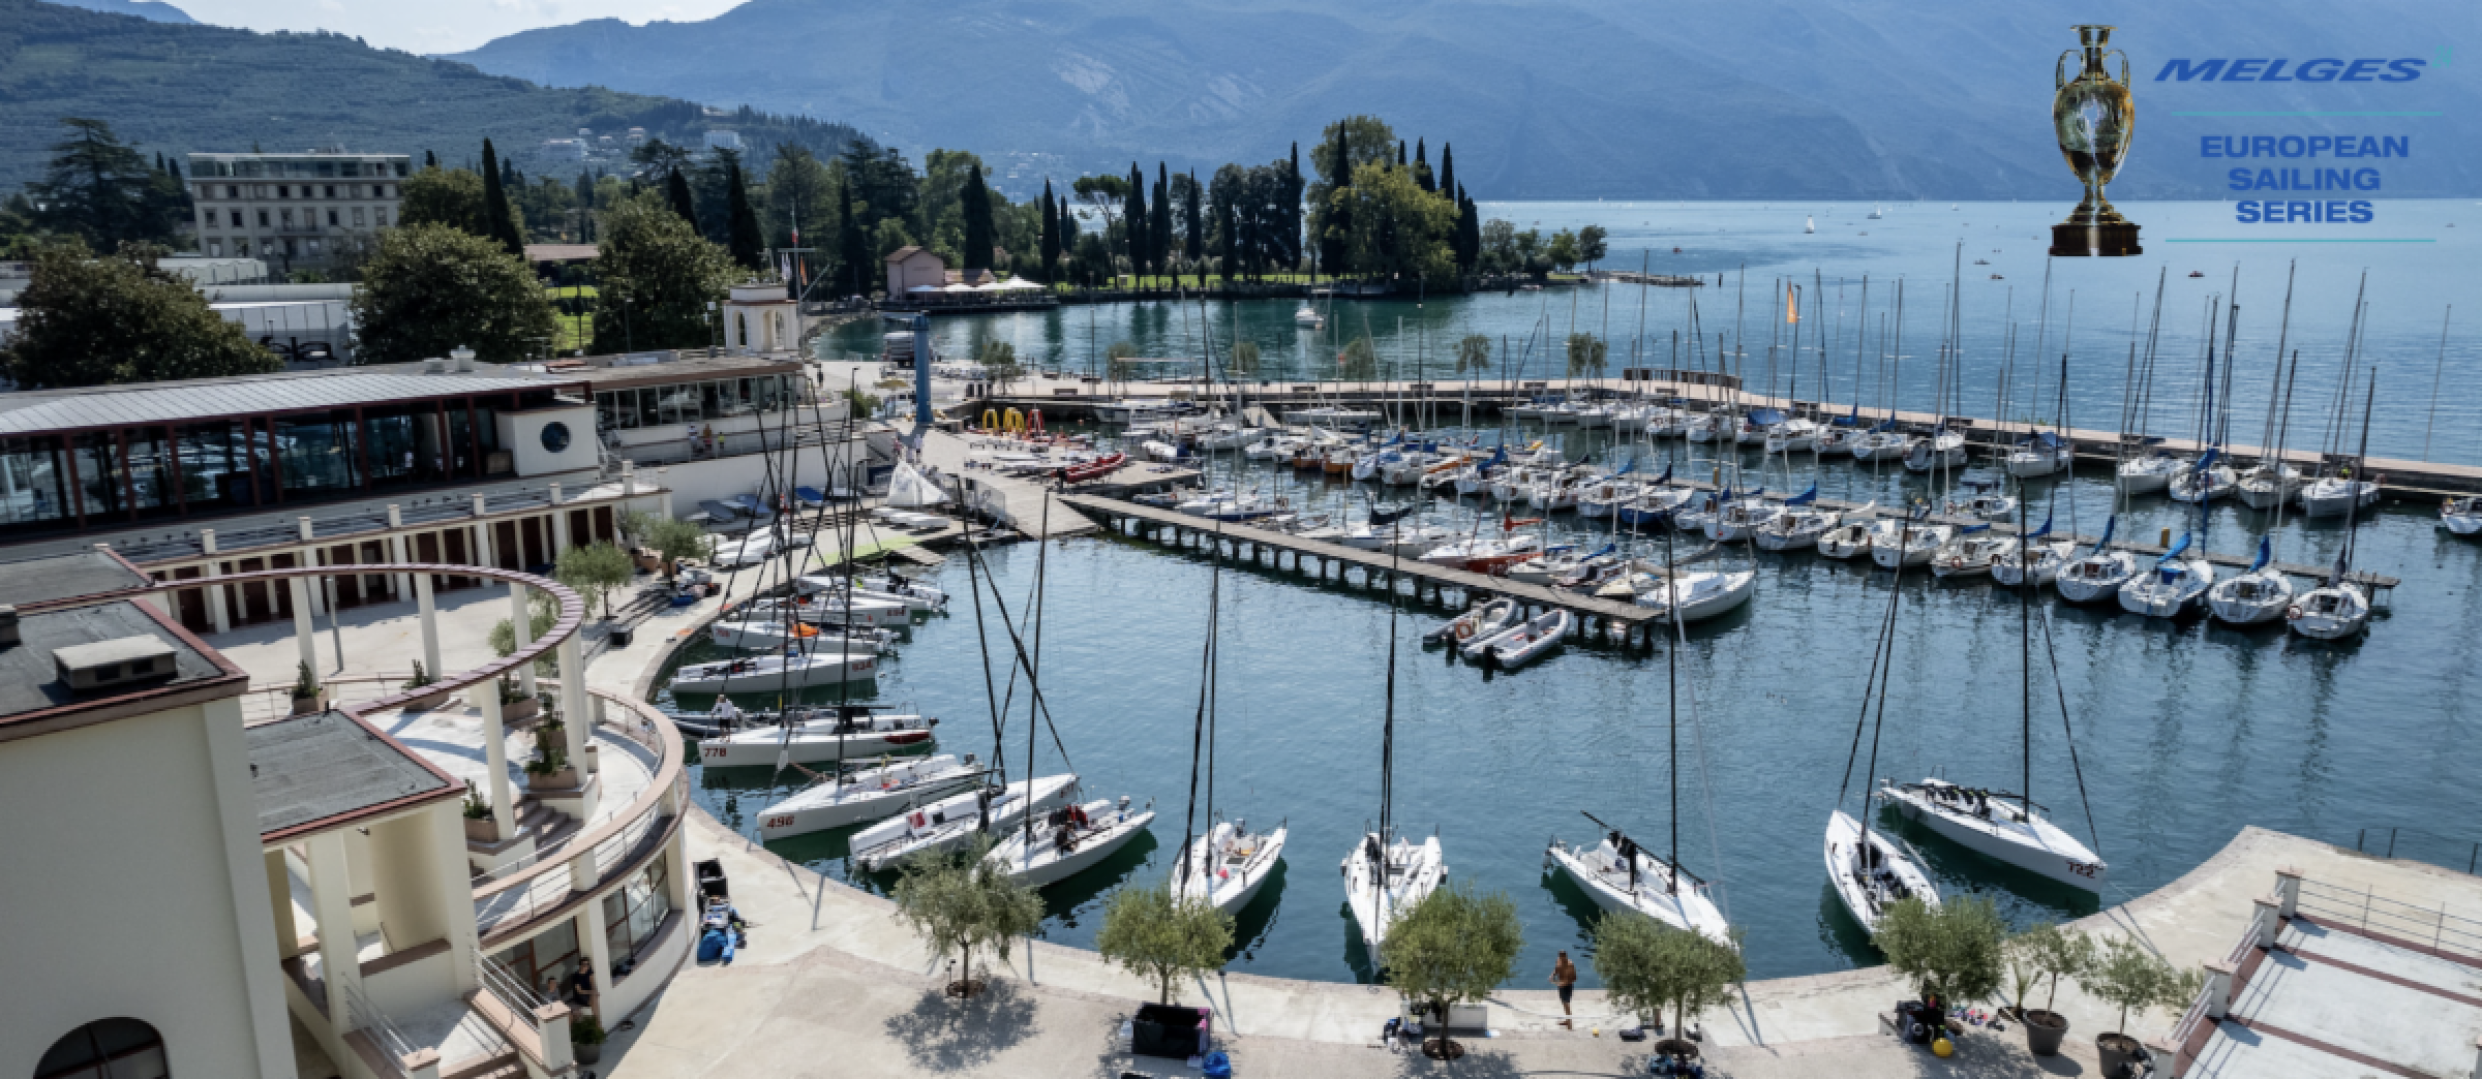 The fourth event of the Melges 24 European Sailing Series 2022 will be sailed on lake Garda, in Italy © IM24CA/Zerogradinord